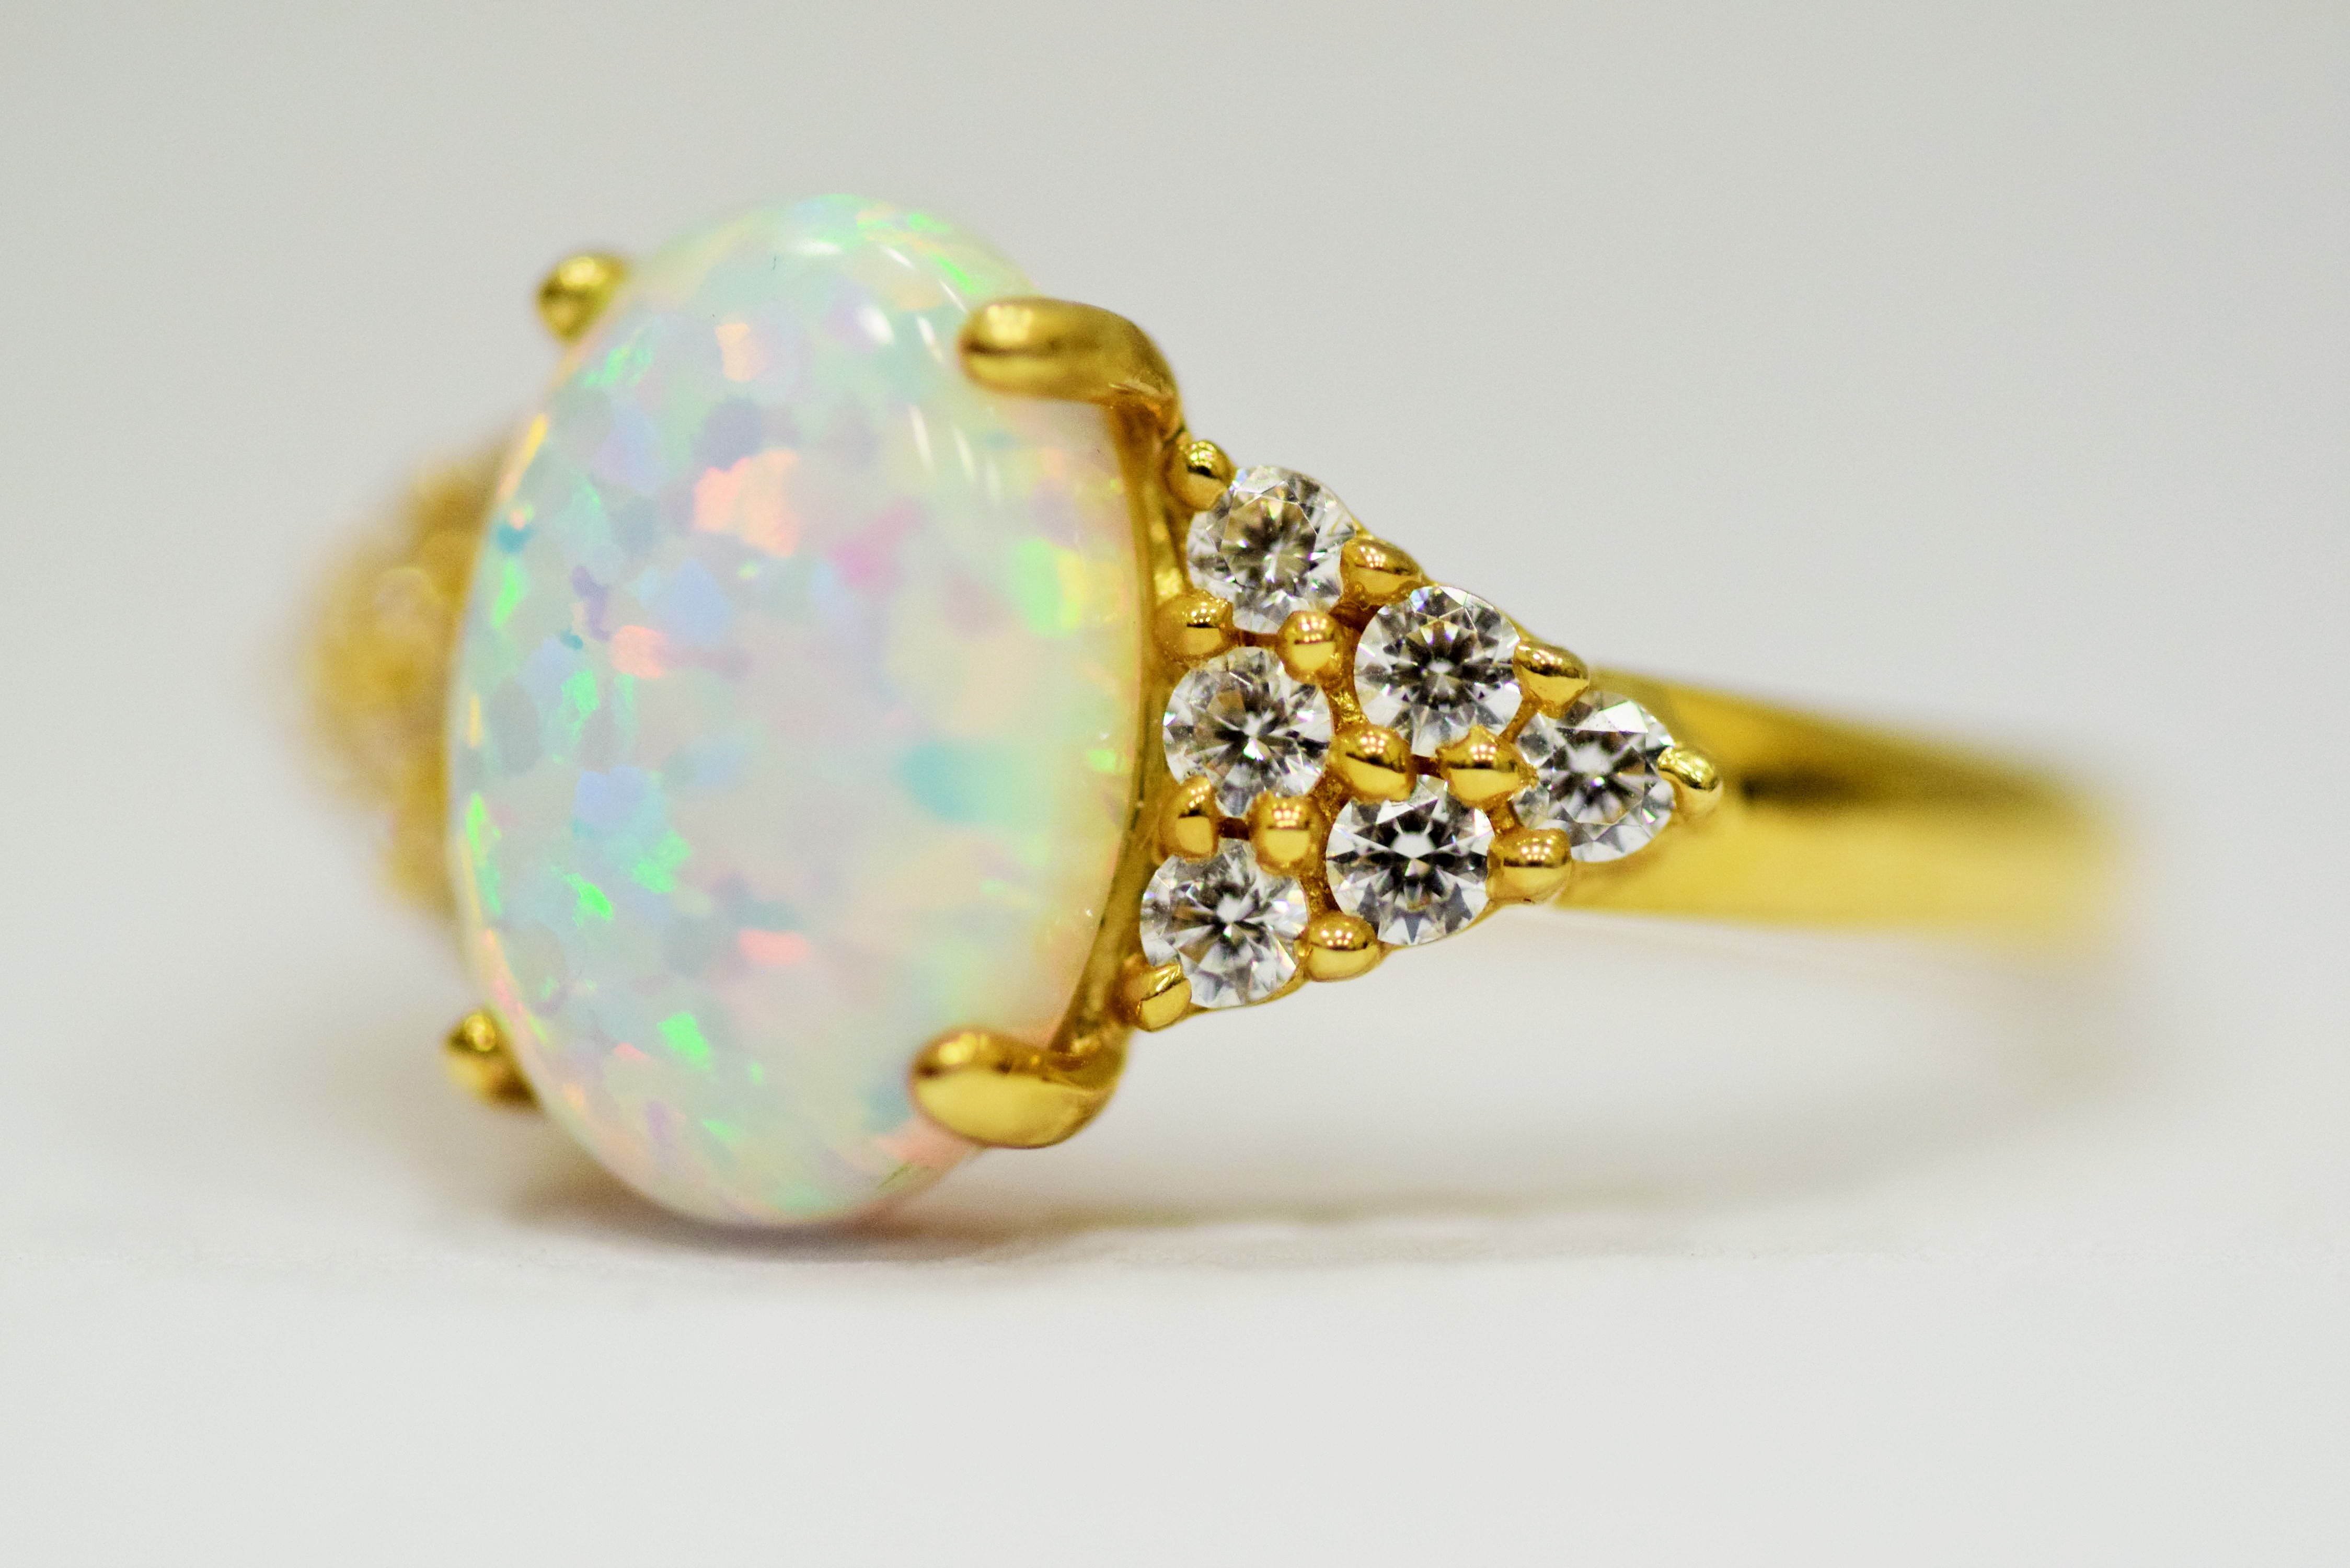 14ct Yellow Gold Ring set with a large central Opal which measures 12 x 8mm with 12 clear gemstones  - Image 3 of 4